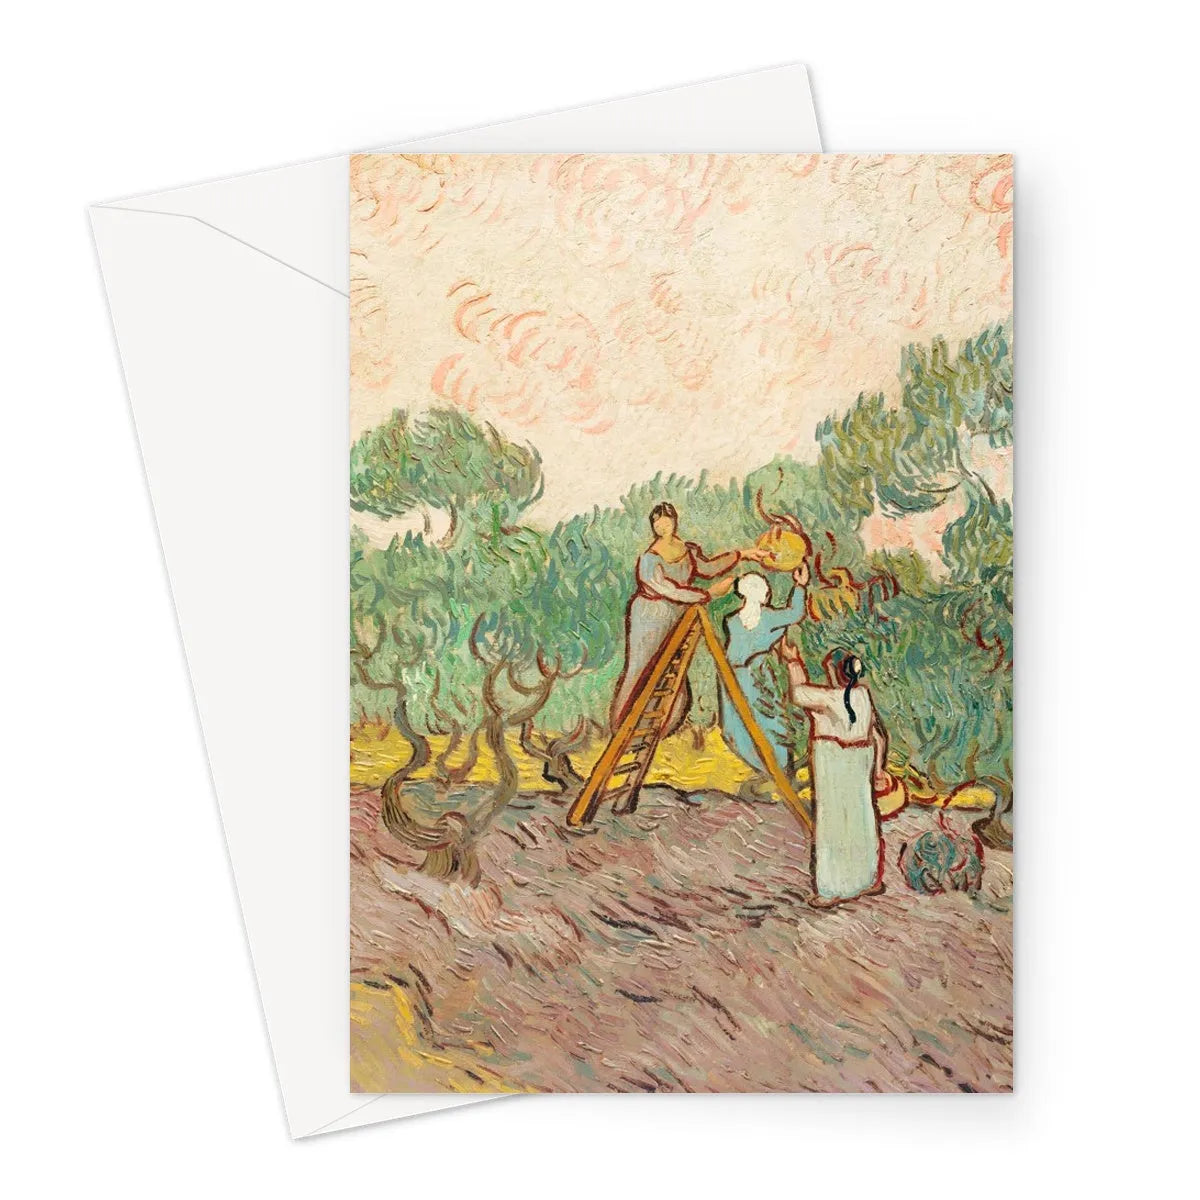 Women Picking Olives By Vincent Van Gogh Greeting Card - A5 Portrait / 1 Card - Greeting & Note Cards - Aesthetic Art